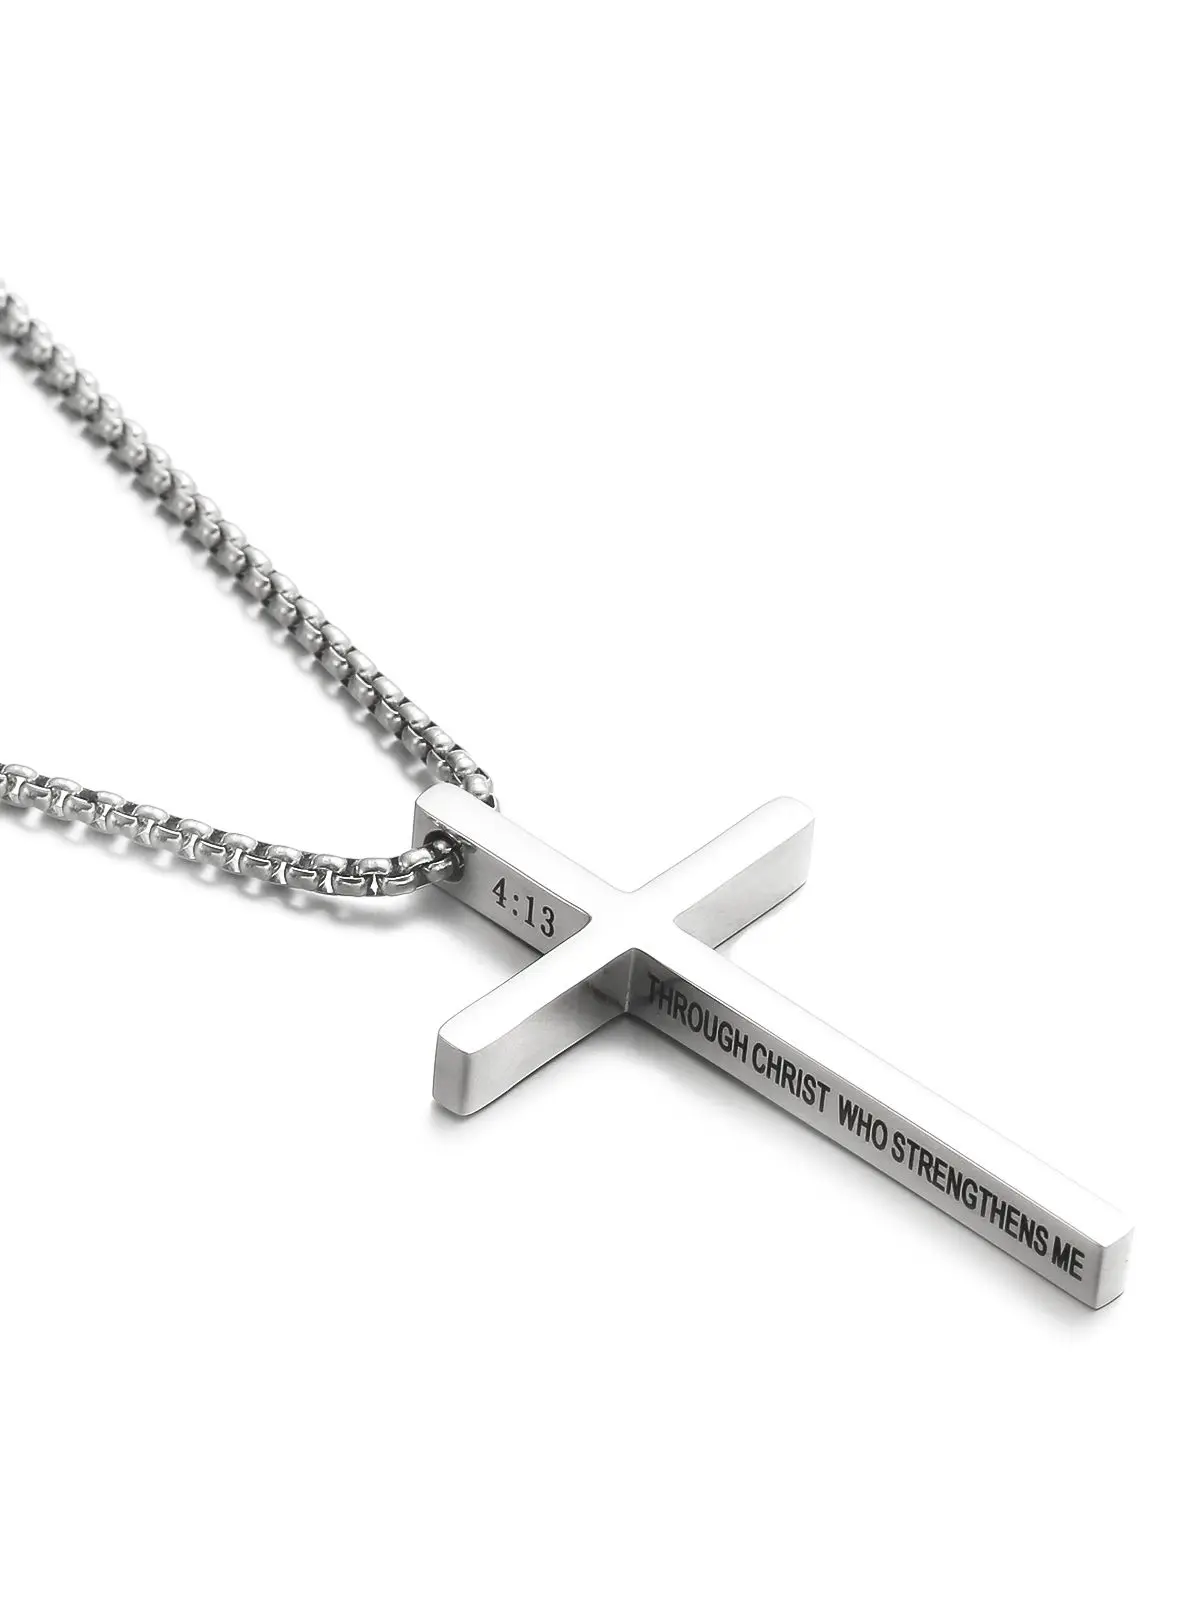 

HOUWU Stainless Steel Philippians 4:13 Cross Christian Bible Verse Pendant Ankh Necklace for Men